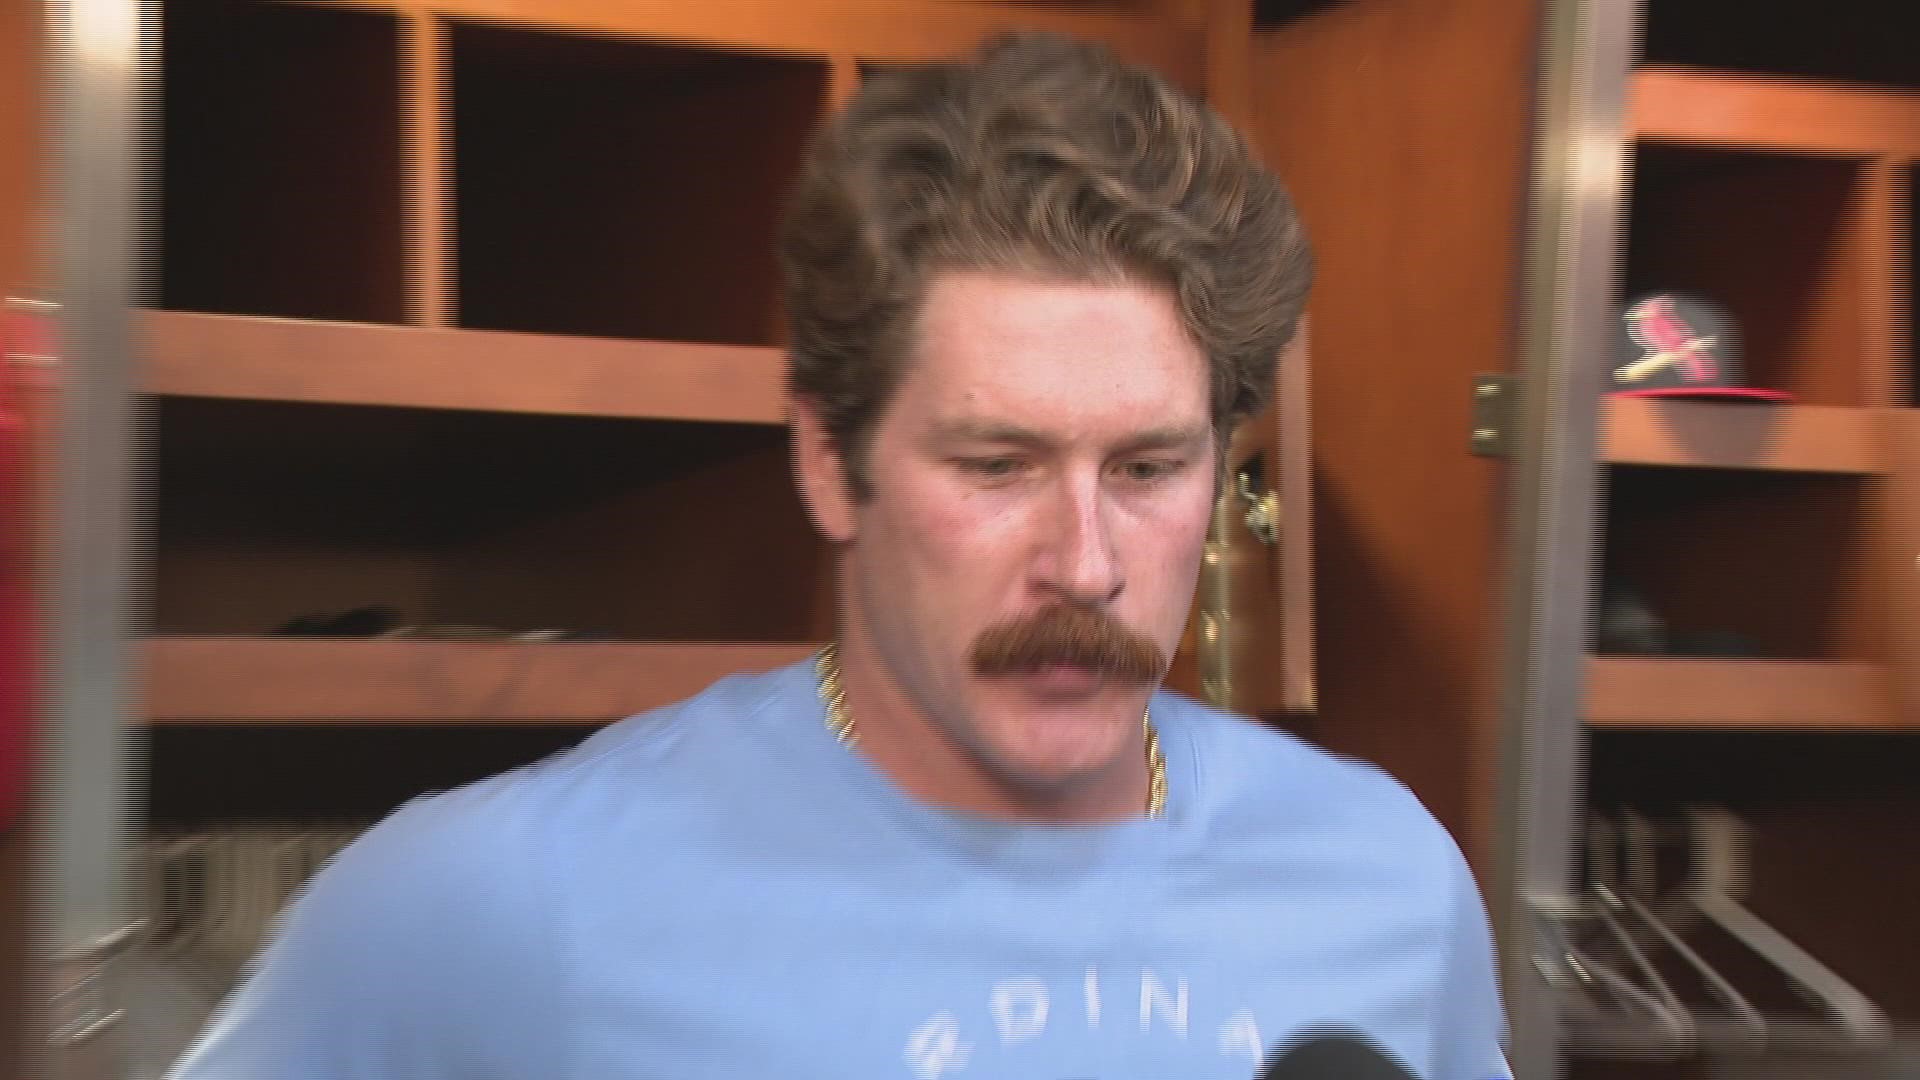 Game 2 starter Miles Mikolas talked bout the team's playoff exit and playing with Albert Pujols and Yadier Molina for the last time.